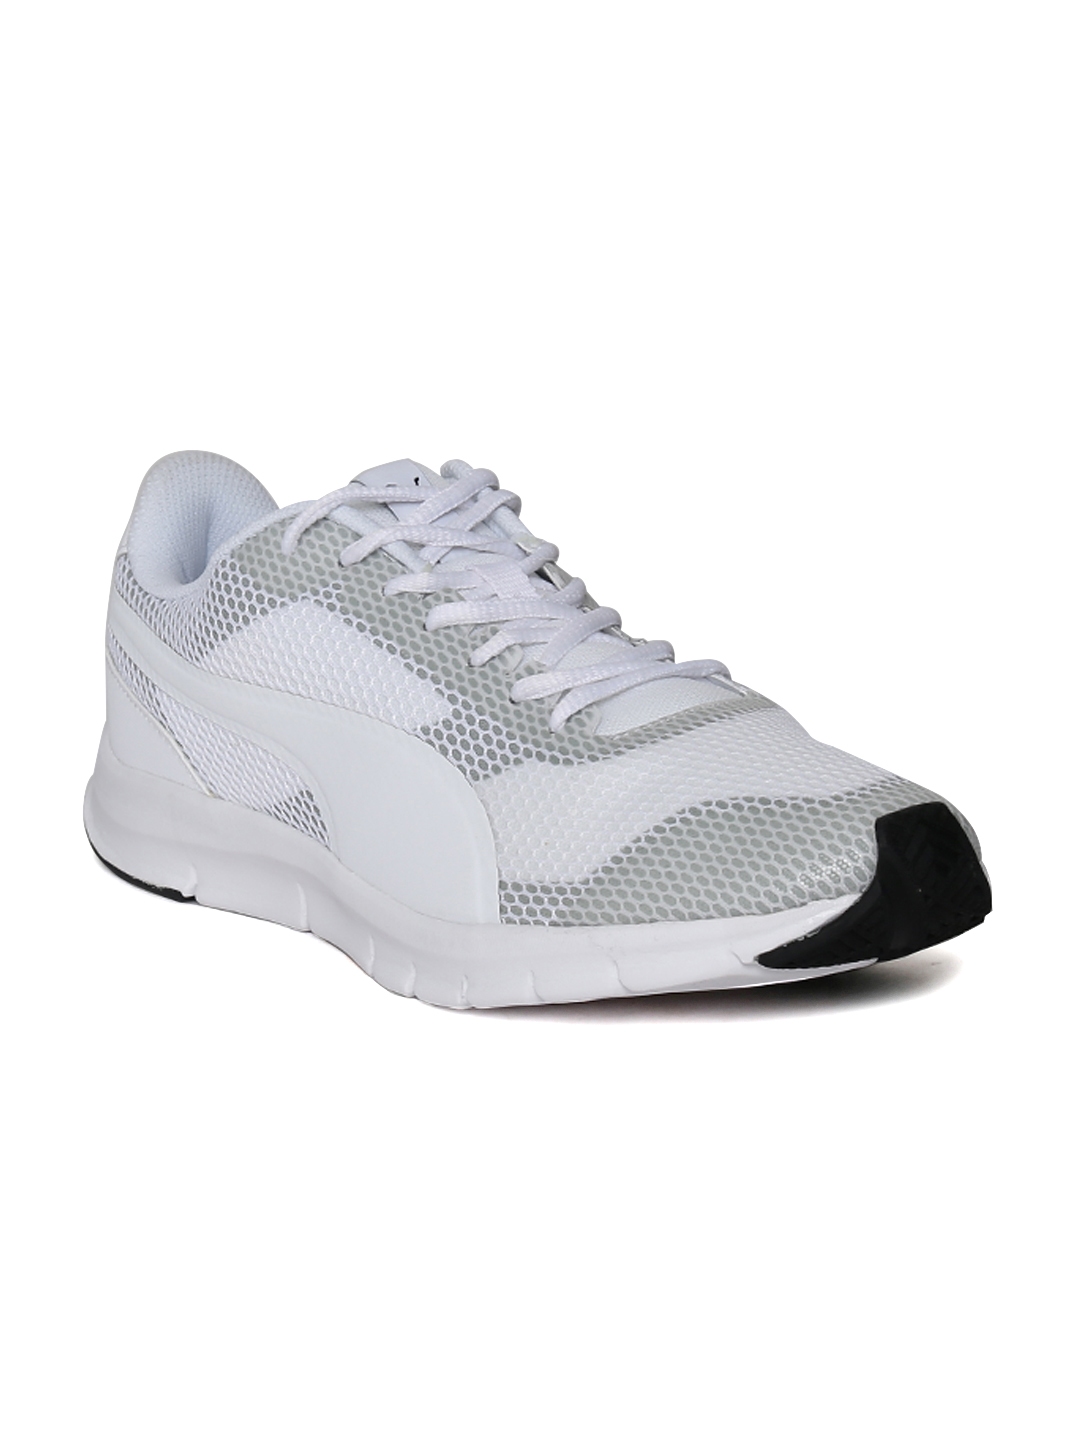 Buy Puma Men White Textured Running Shoes 36482001 - Sports Shoes for ...